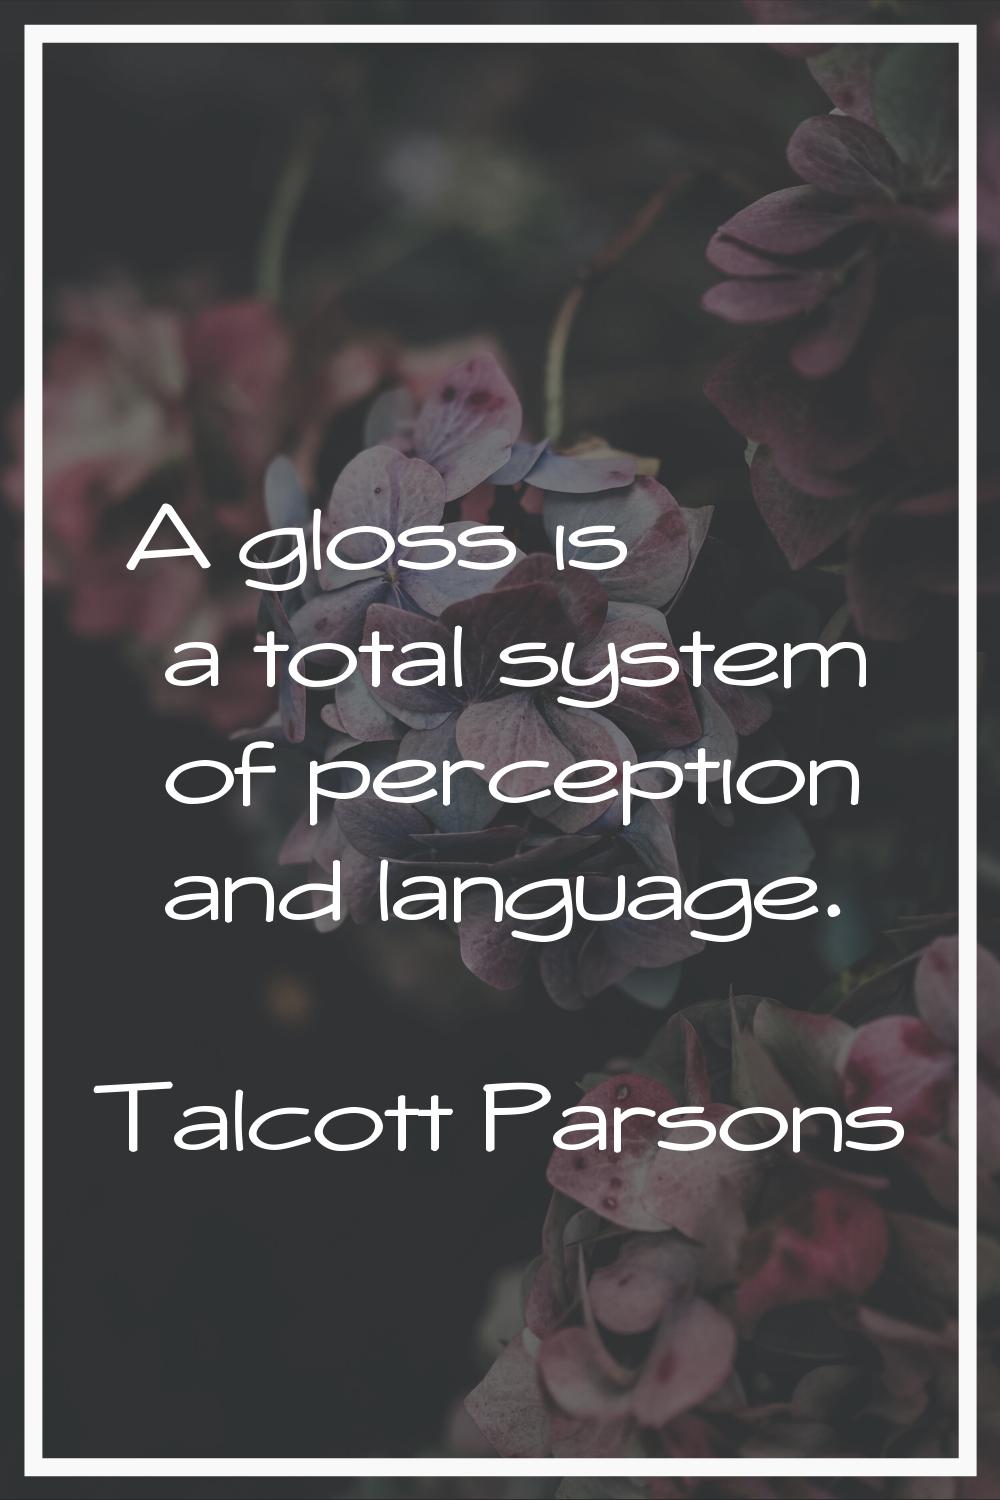 A gloss is a total system of perception and language.